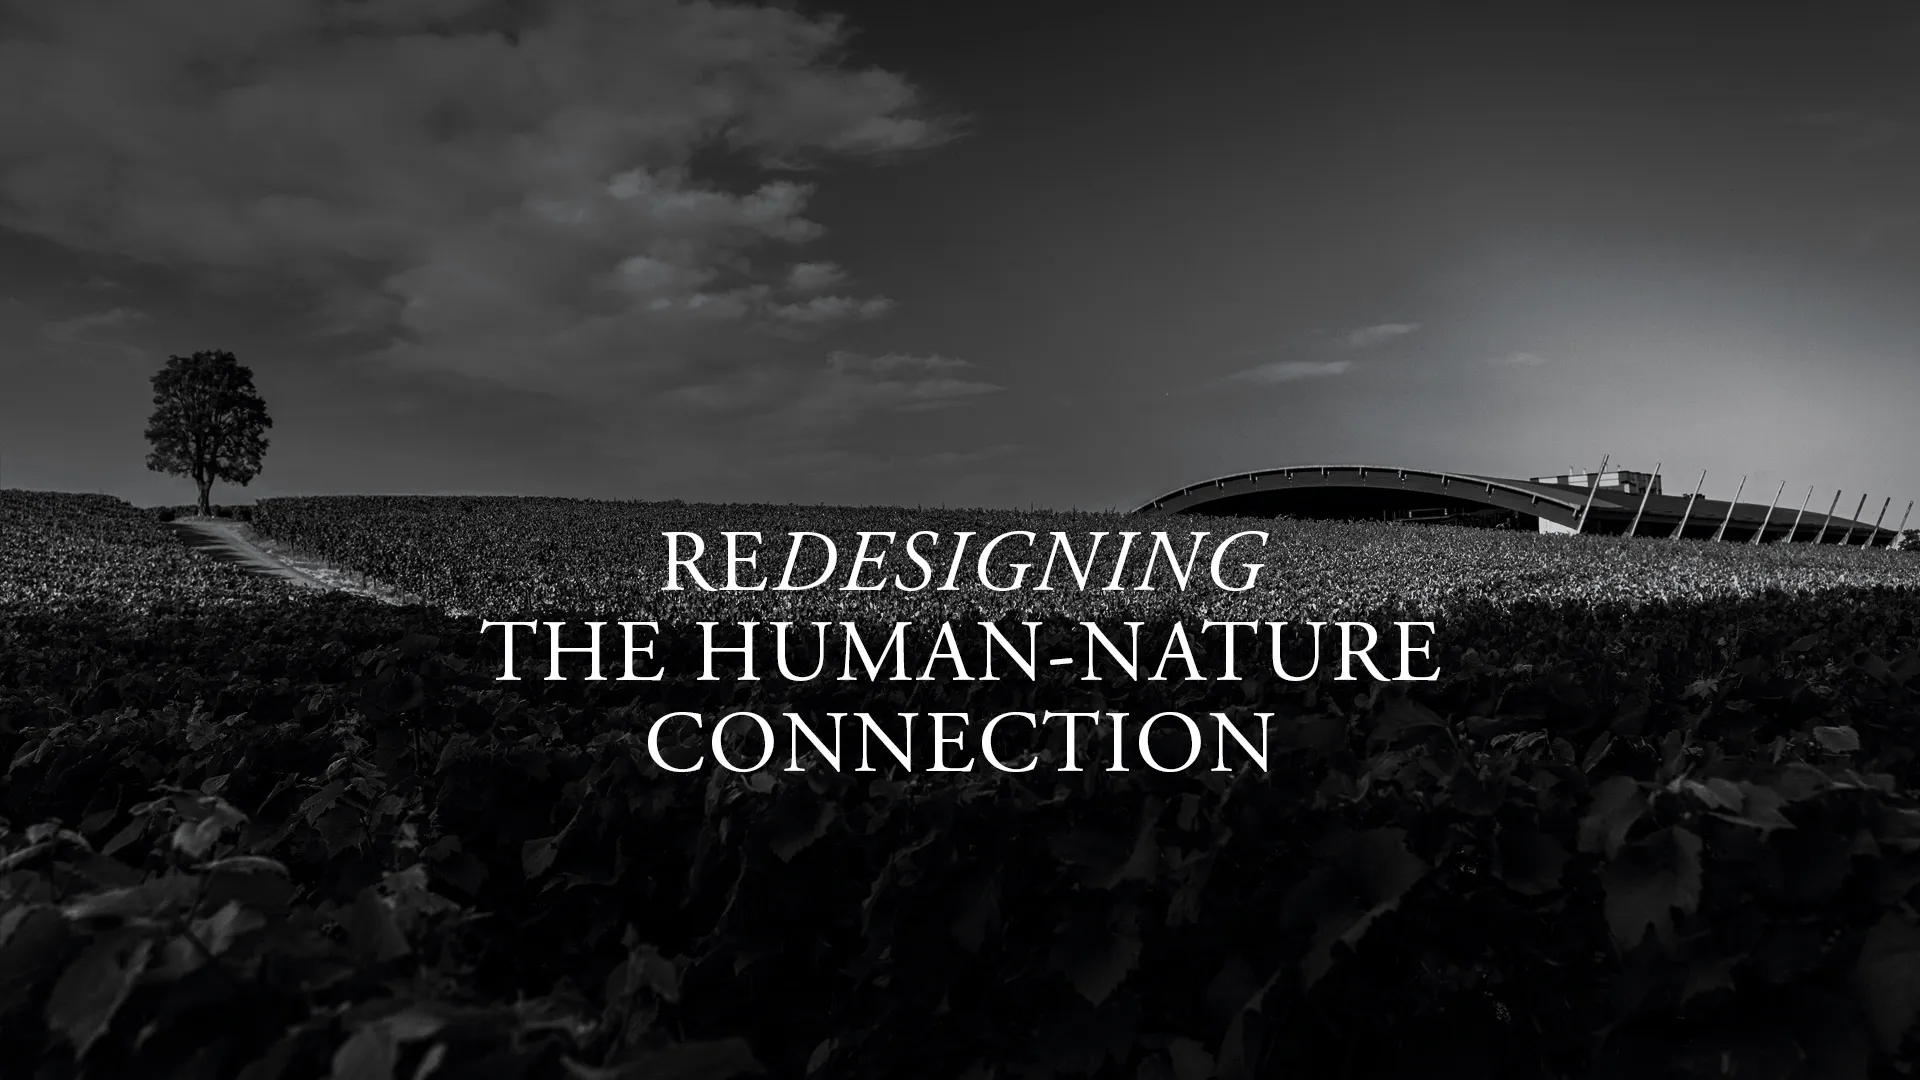 Redesigning the human-nature connection.